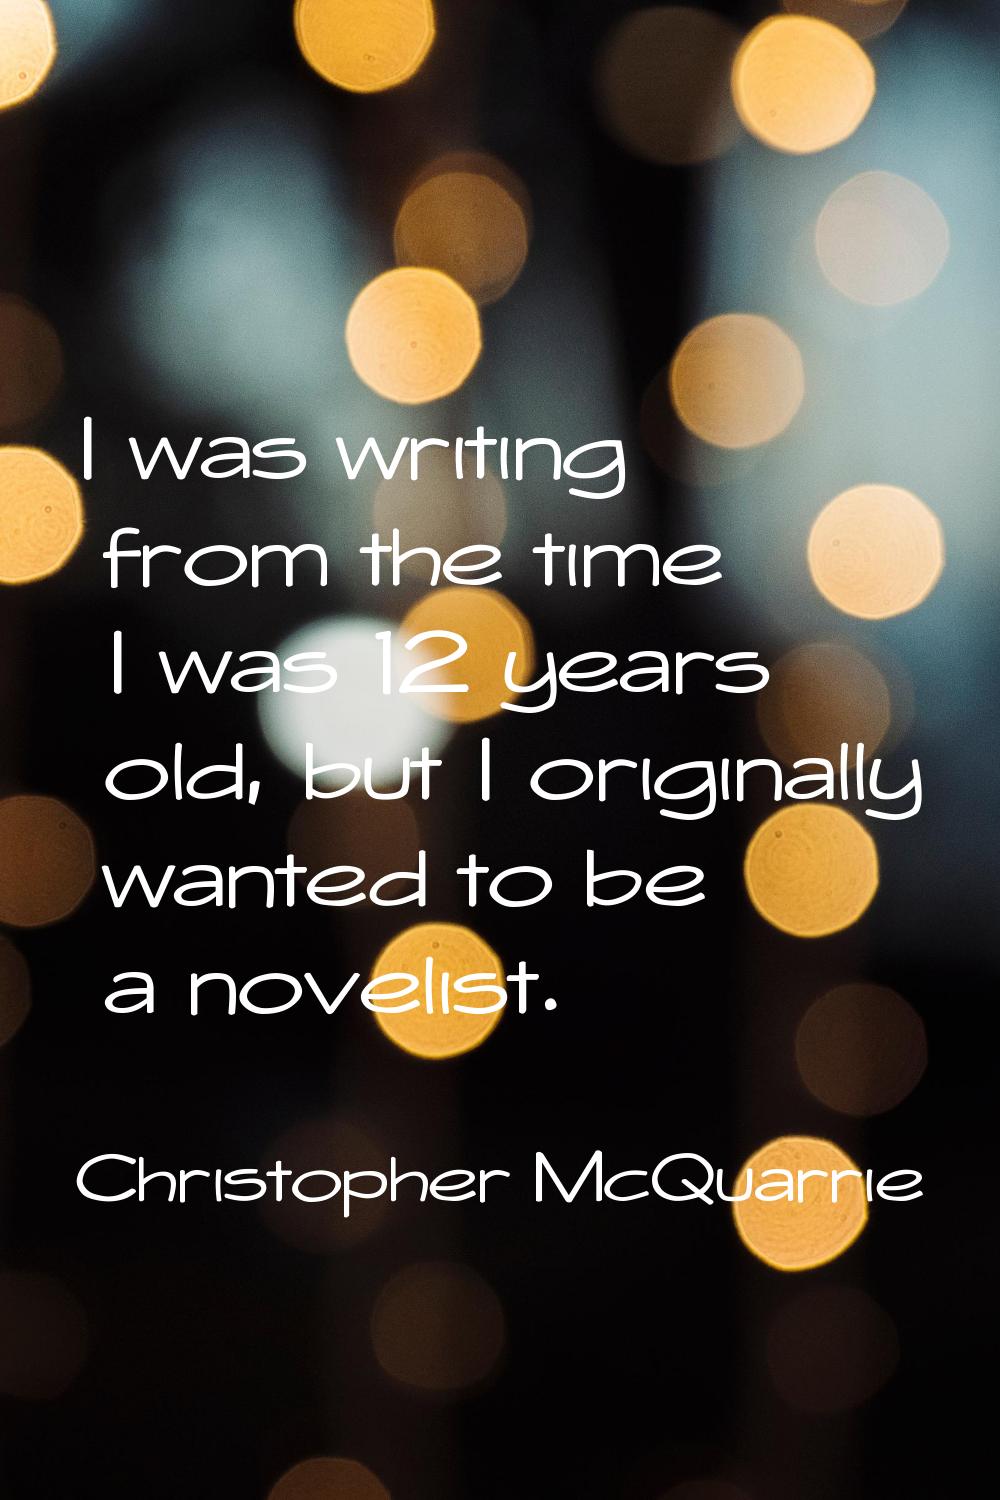 I was writing from the time I was 12 years old, but I originally wanted to be a novelist.